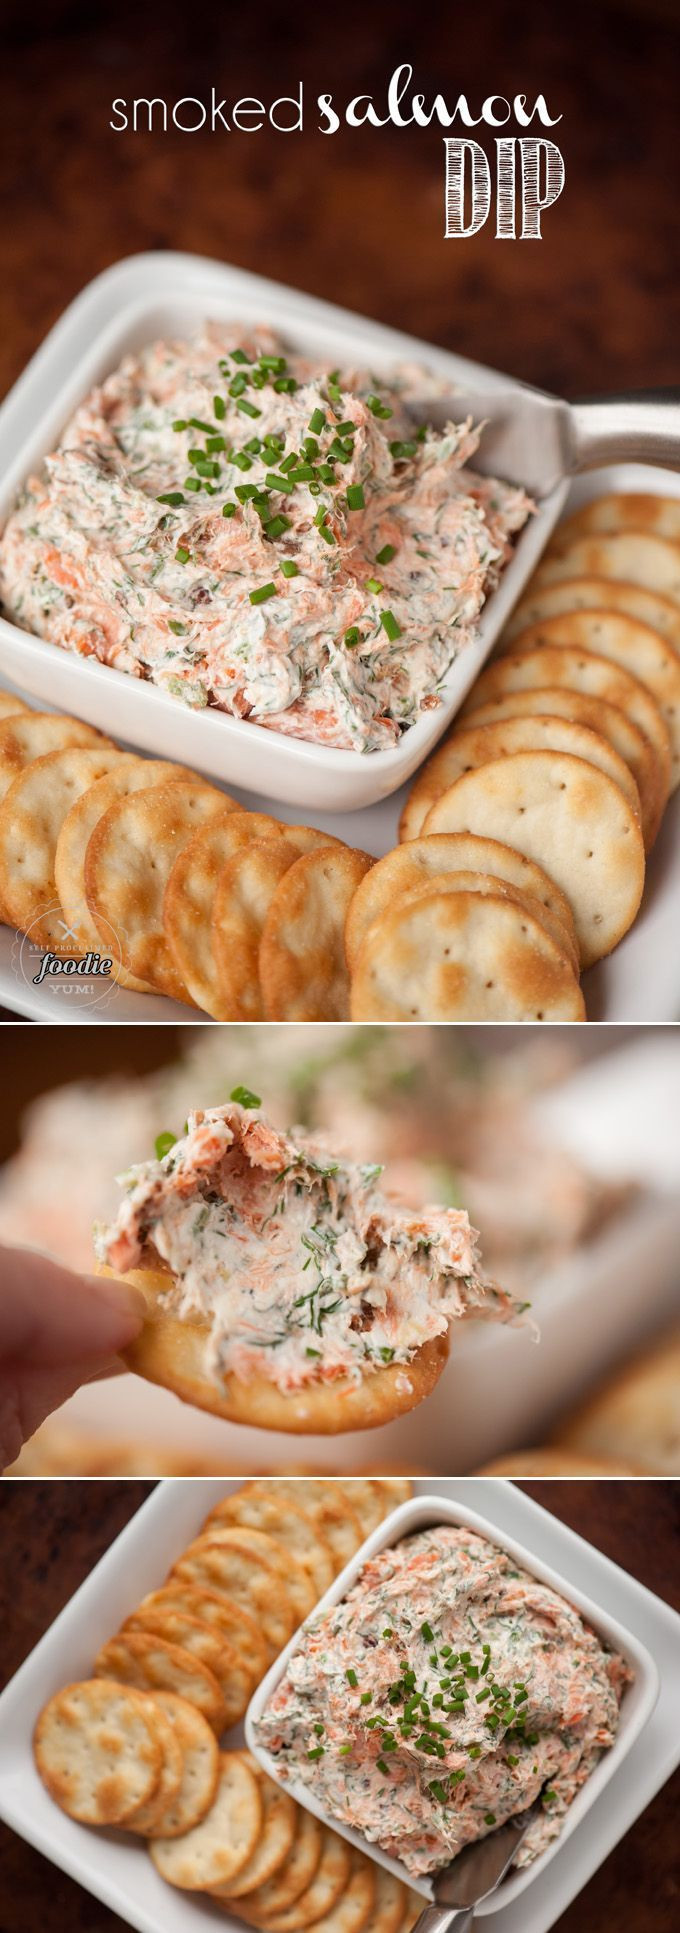 Zucker'S Bagels &amp; Smoked Fish
 This Smoked Salmon Dip made with hot smoked salmon & bacon